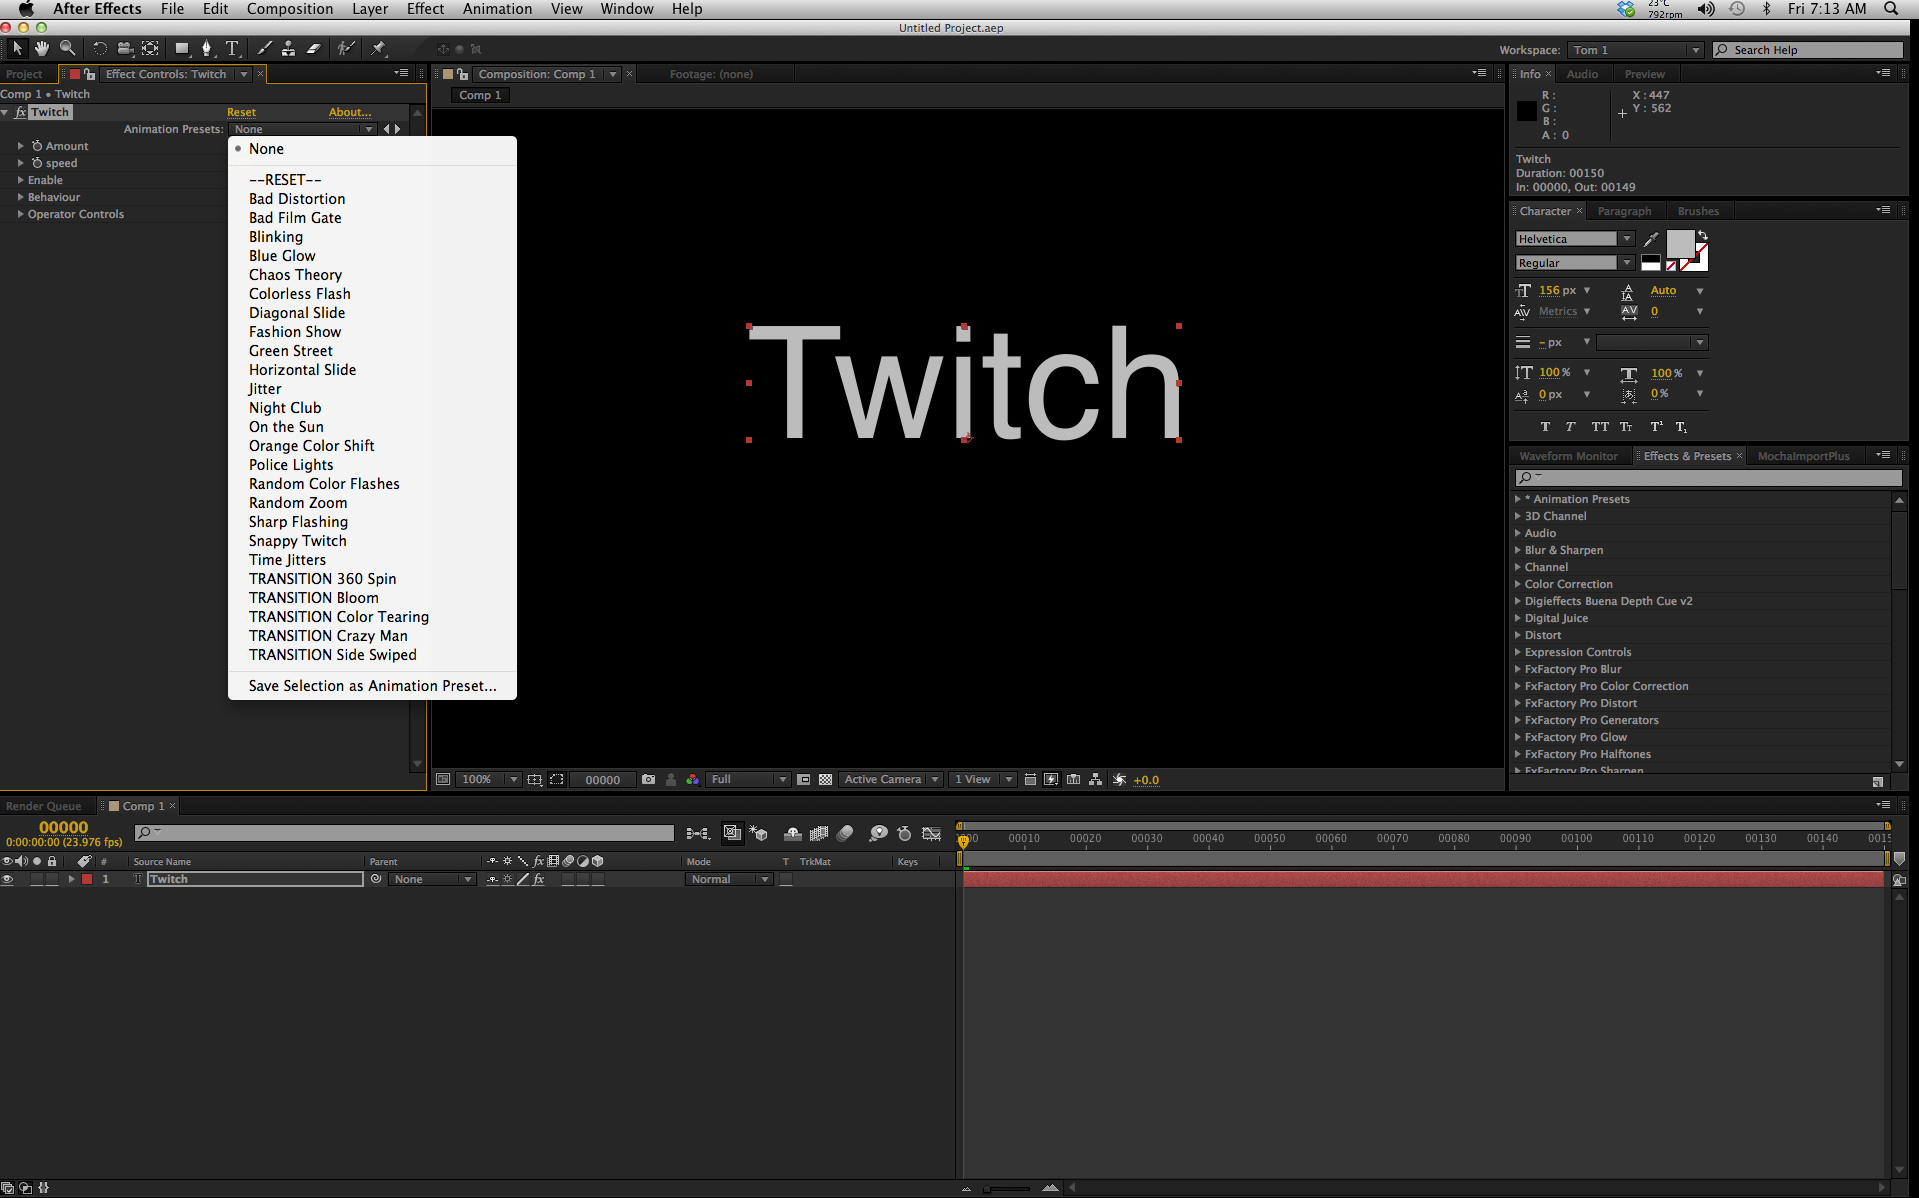 twitch after effects cc 2015 download